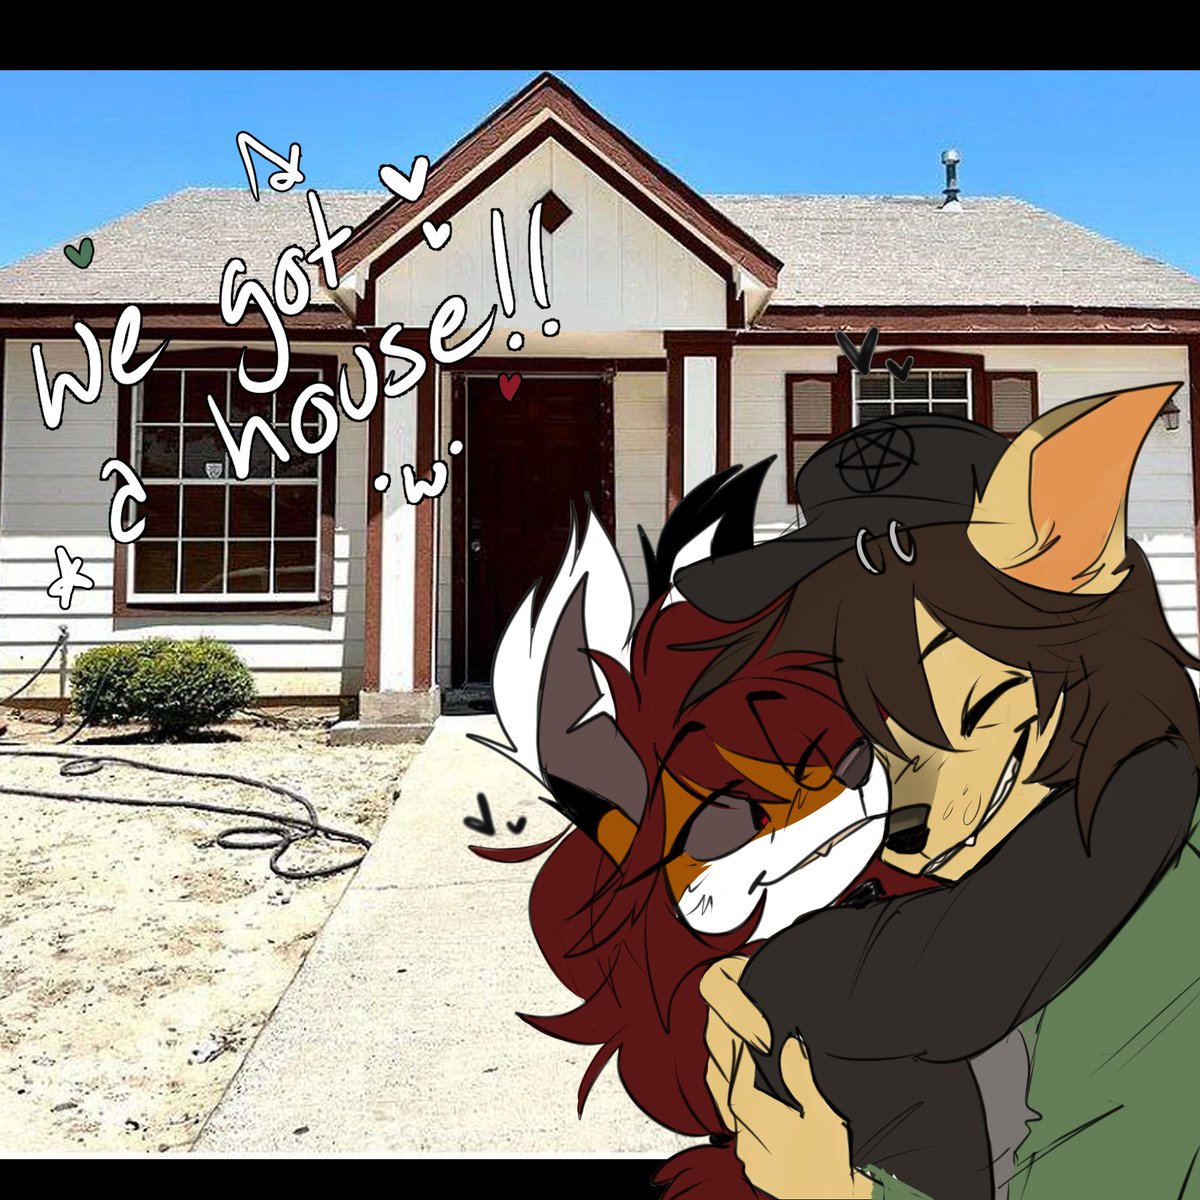 YIPPIEEEE!!! the dog bf and I got a house!!! 🎉🖤 i have an amazon wishlist in case anyone would like to give us a little house warming gift or send a KOFI my way since my job cut my hours drastically out of no where 👉👈